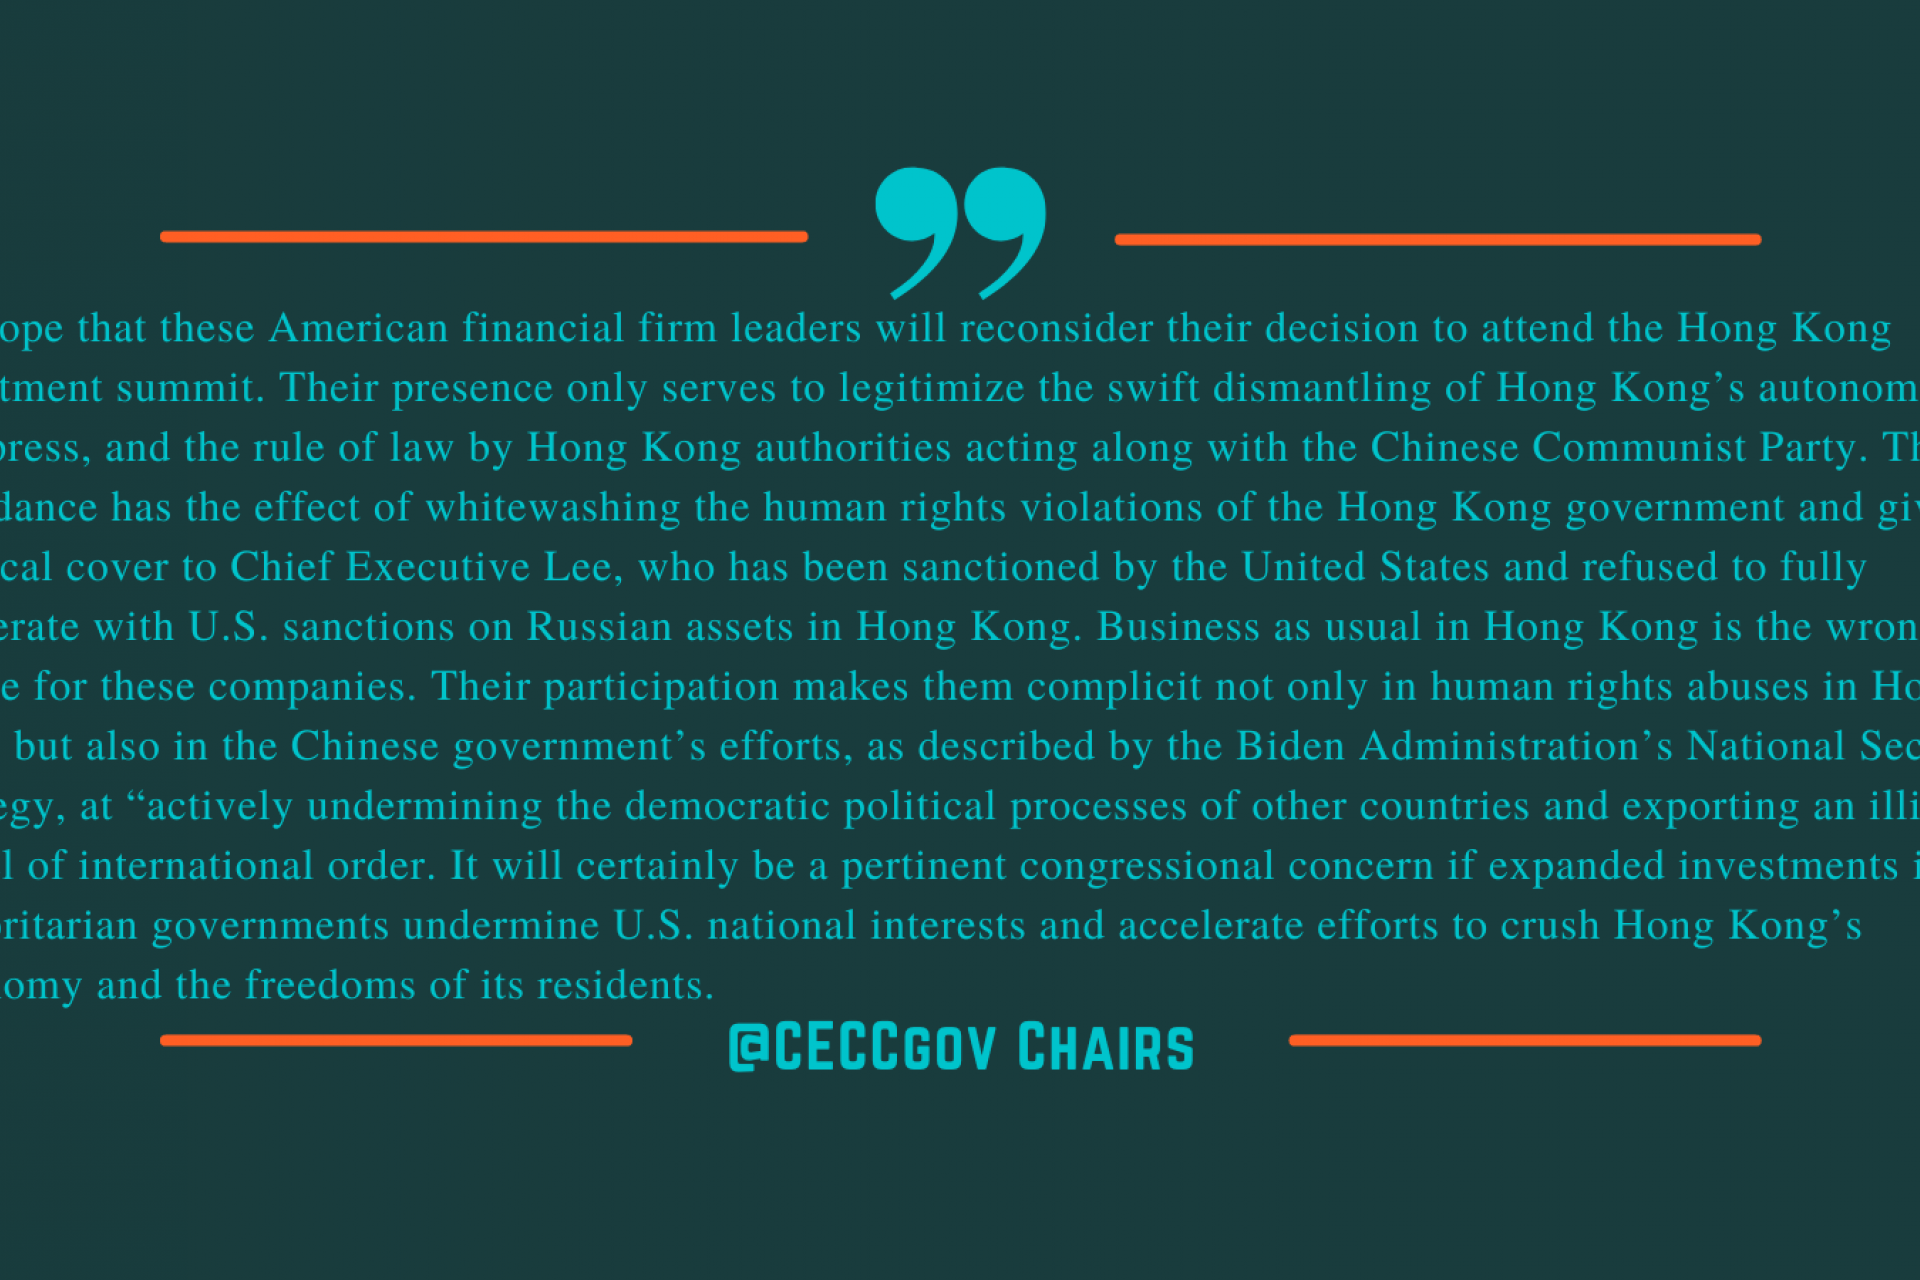 Chairs’ Statement on US Financial Firms Attending the Hong Kong Investment Summit feature image